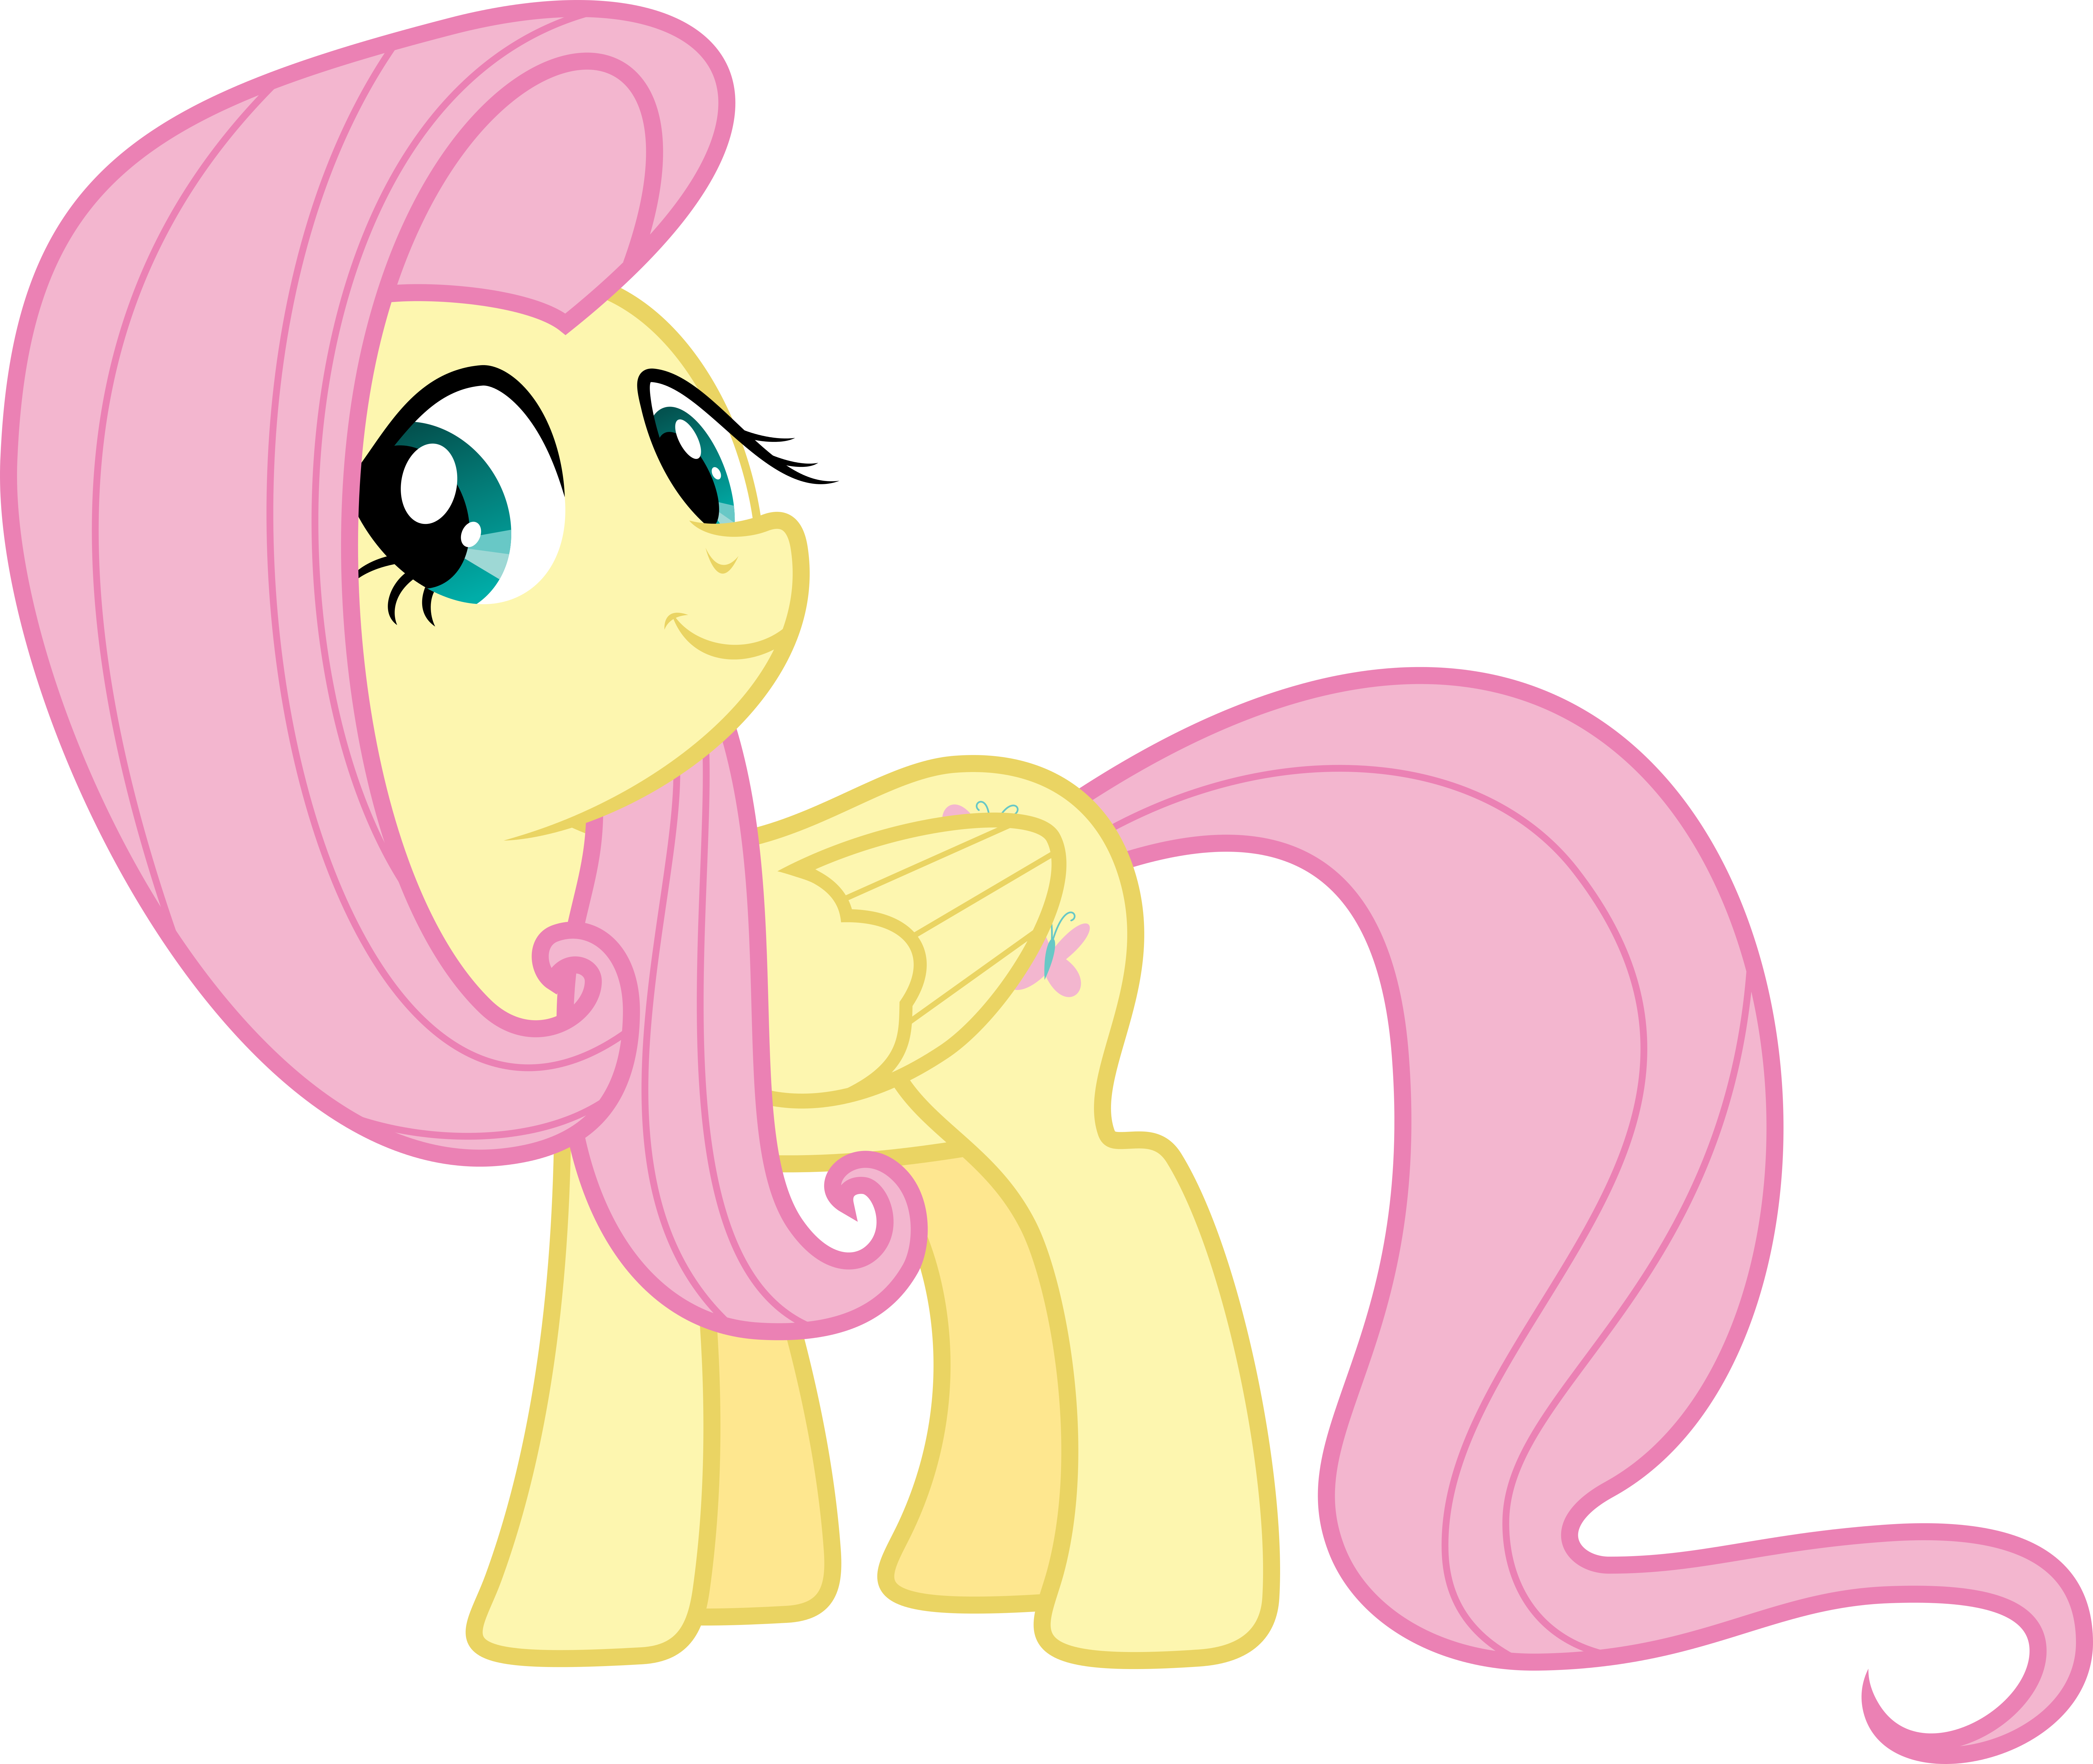 Another Fluttershy Vector